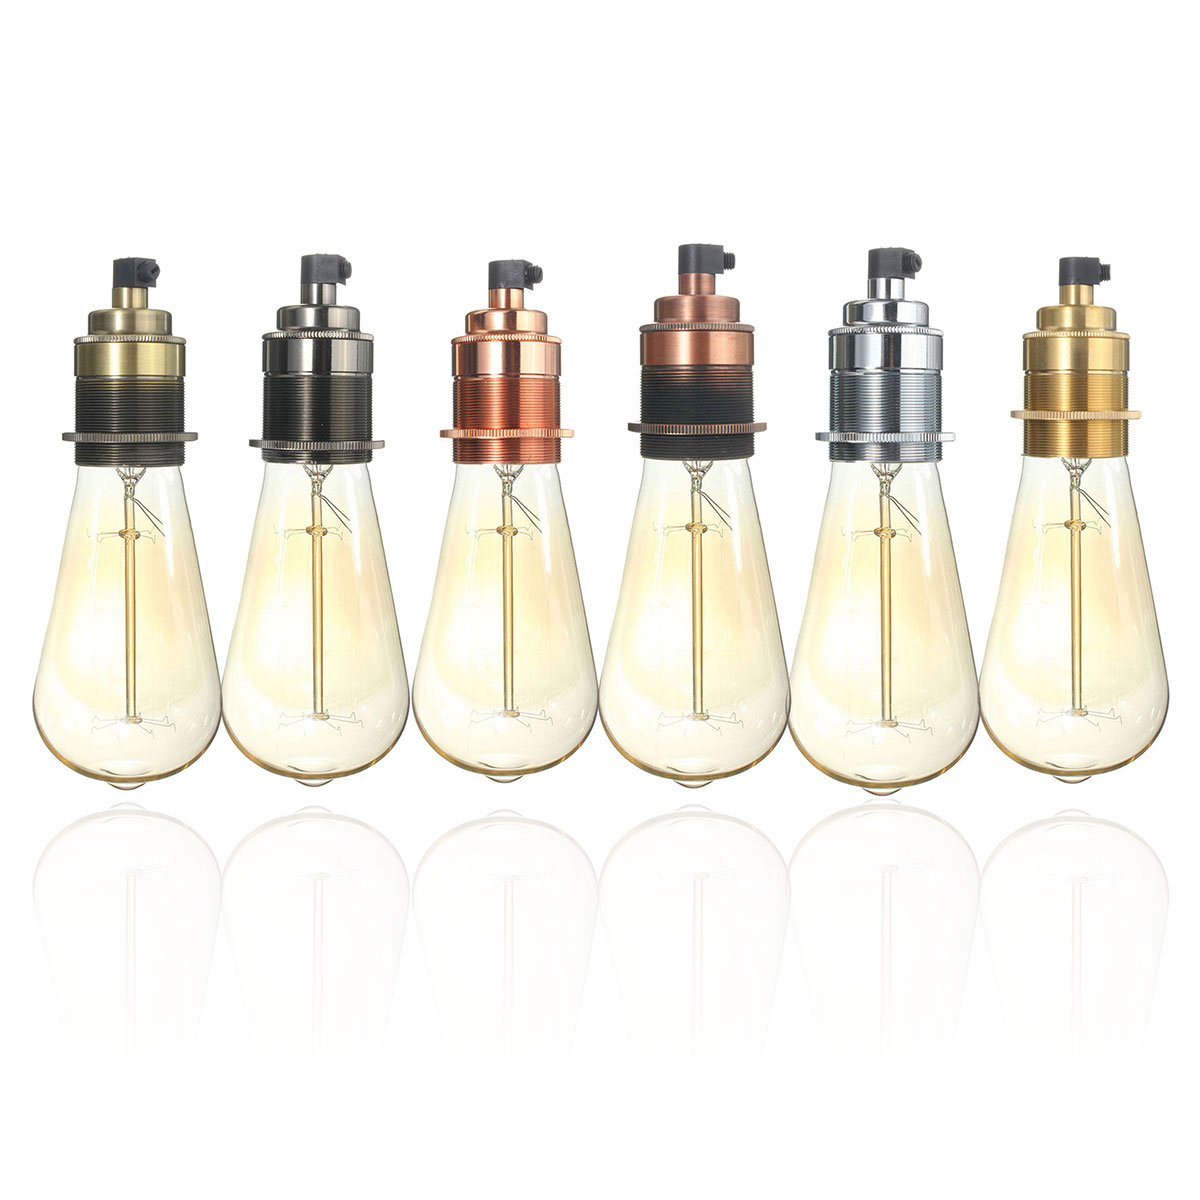 Find E27 Vintage Copper Edison Light Bulb Adapter Lamp Holder for Pendant Lighting AC110 250V for Sale on Gipsybee.com with cryptocurrencies